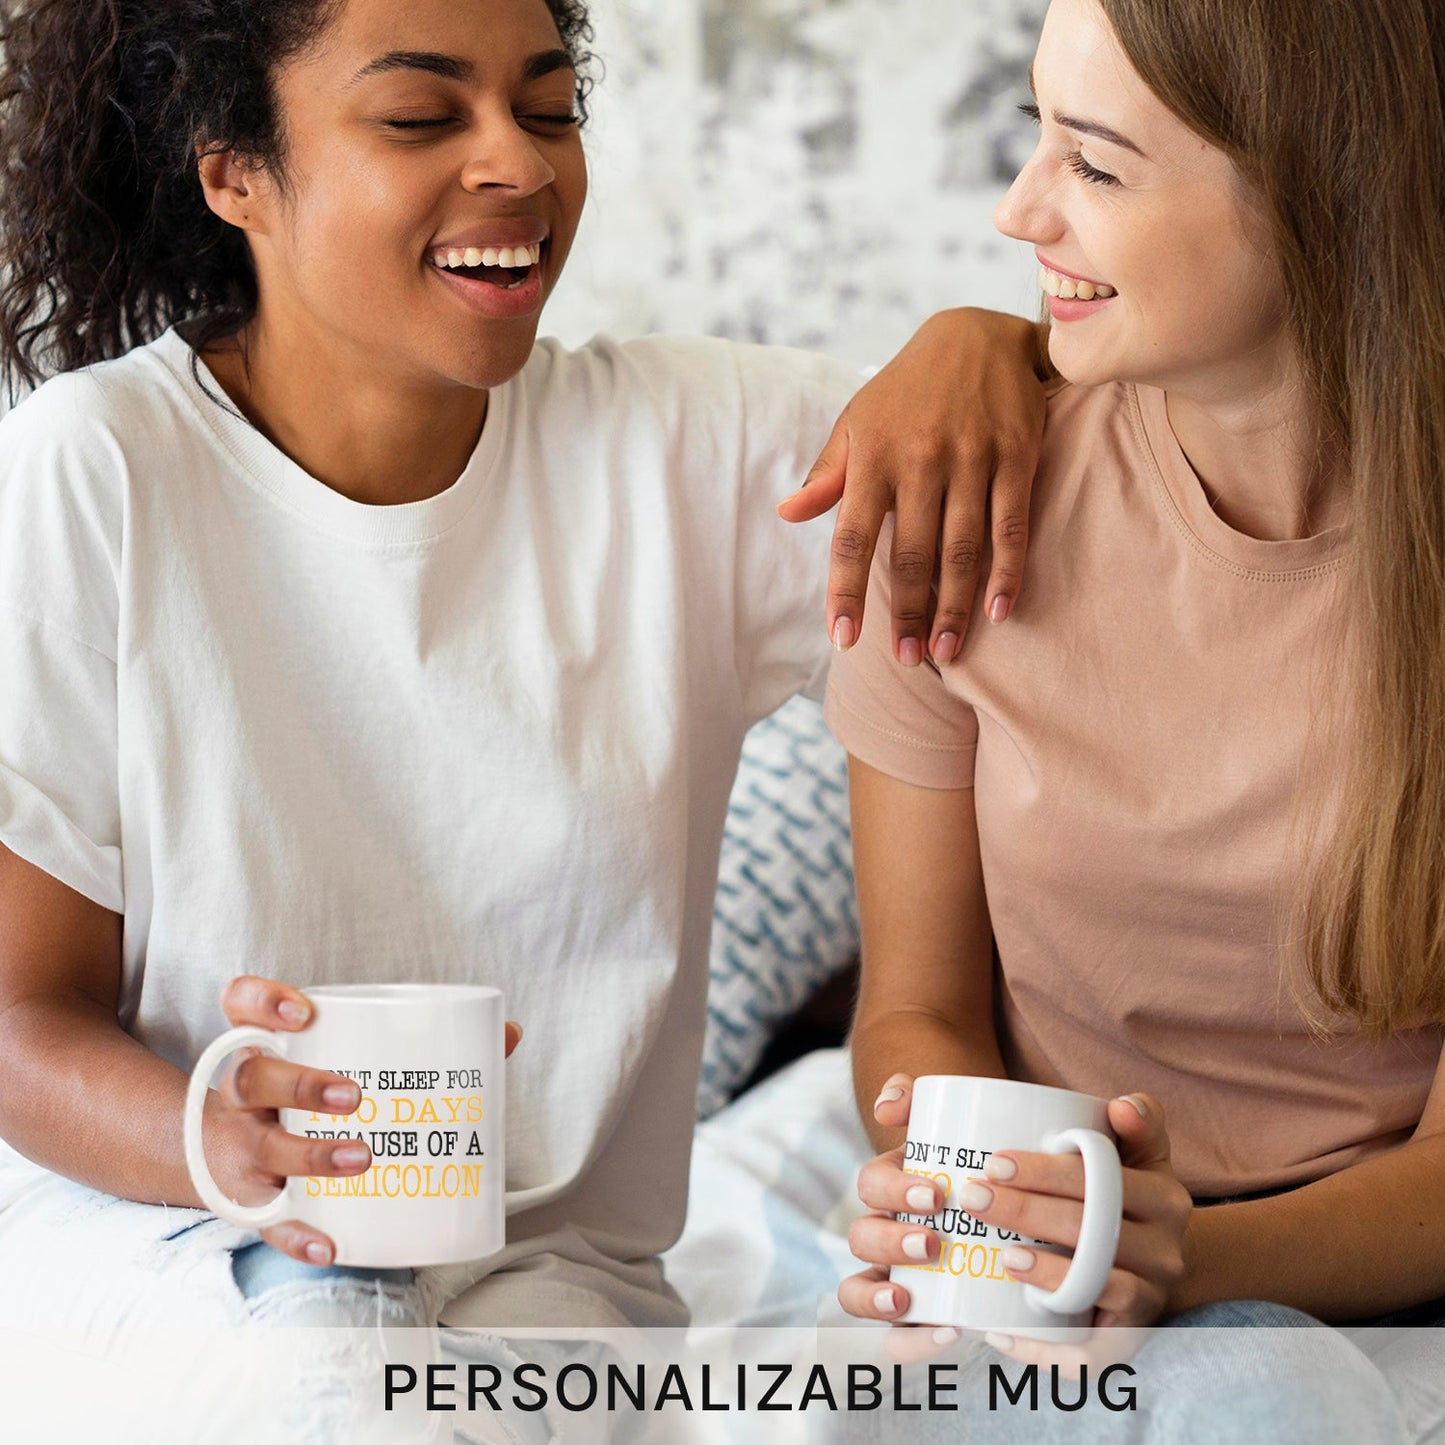 Because of a semicolon - Personalized All occasions gift for Software Engineer - Custom Mug - MyMindfulGifts